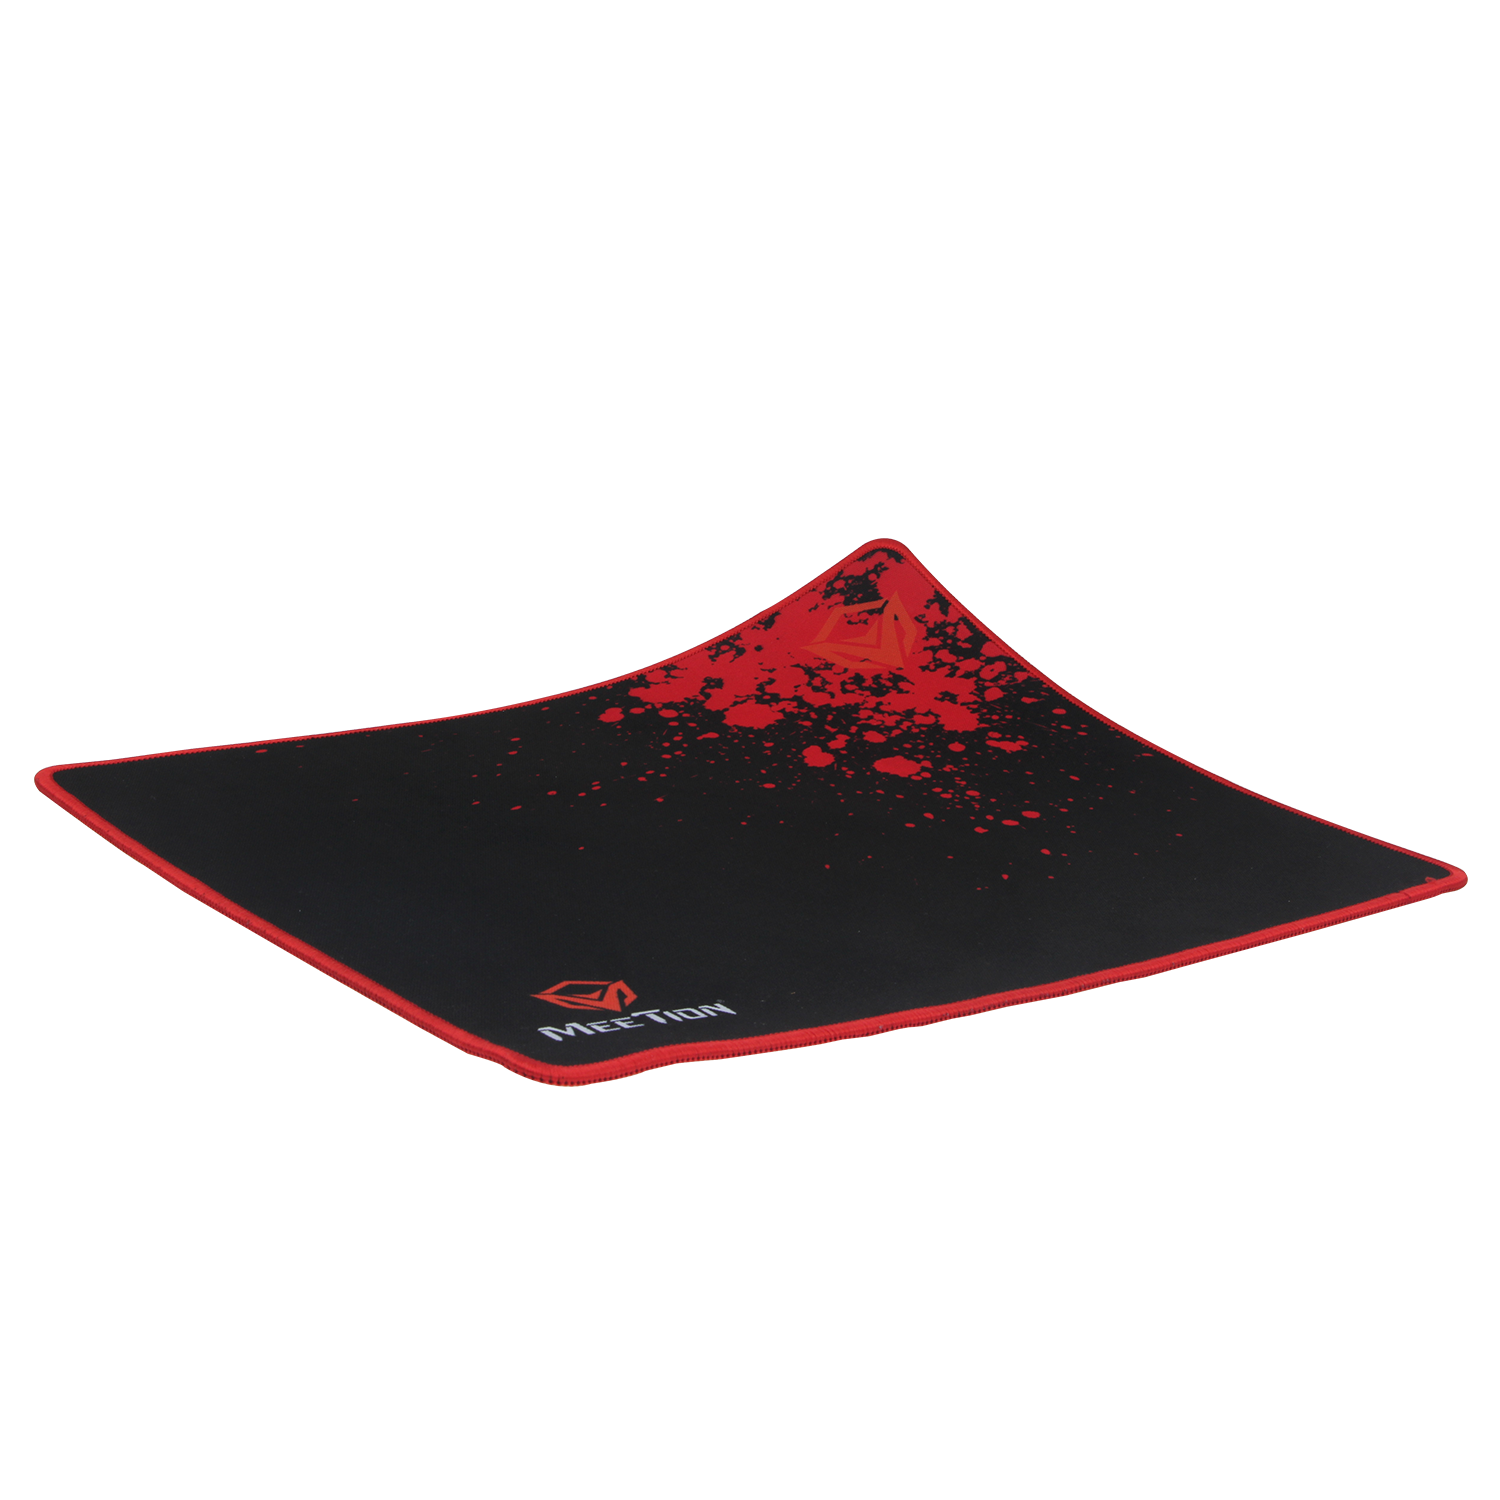 Non-slip Rubber Square Mouse Pad - Meetion P110 Waterproof Gaming Mat for Enhanced Precision and Control